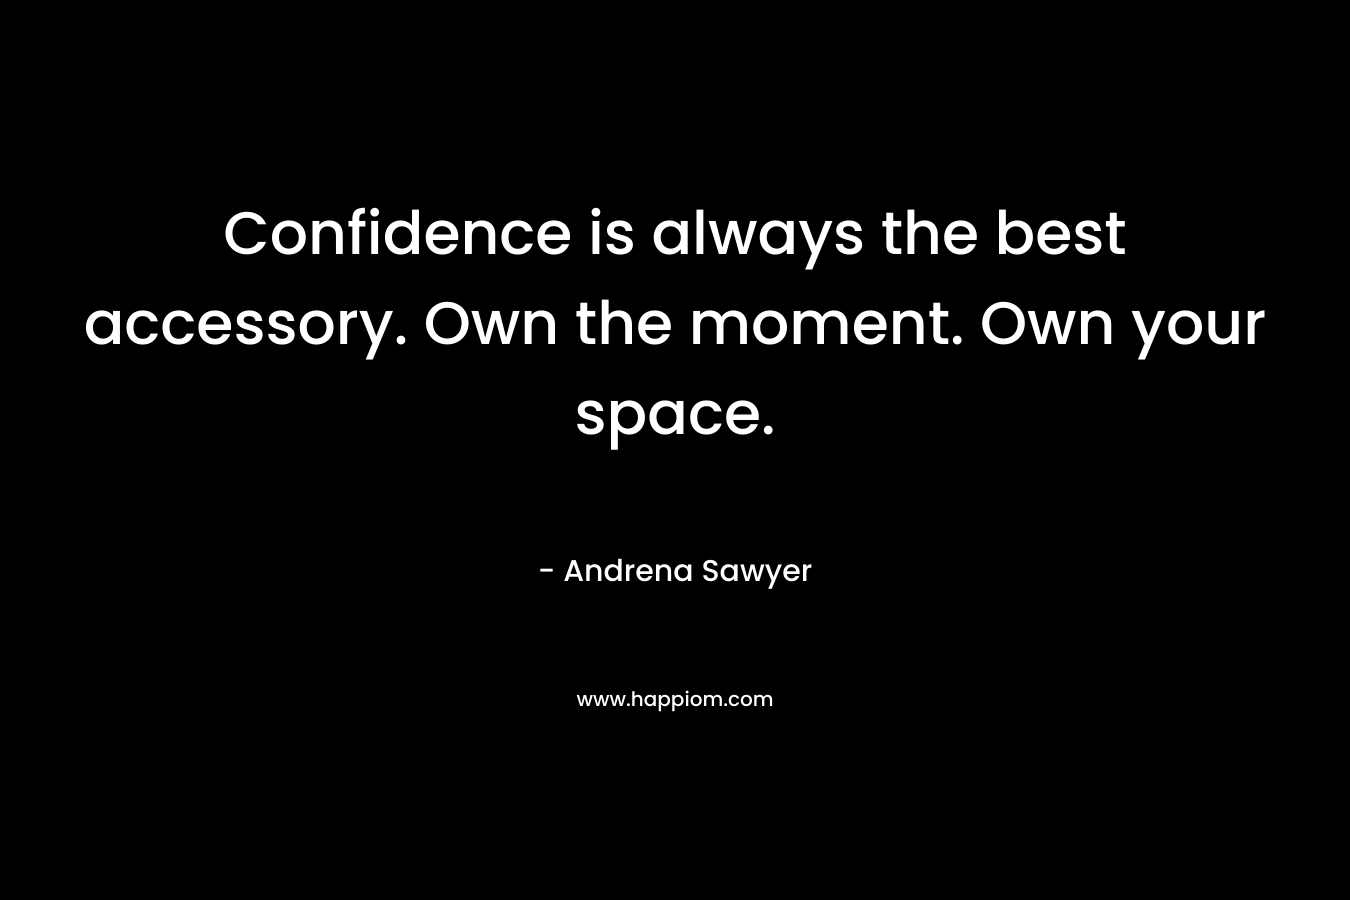 Confidence is always the best accessory. Own the moment. Own your space. – Andrena Sawyer